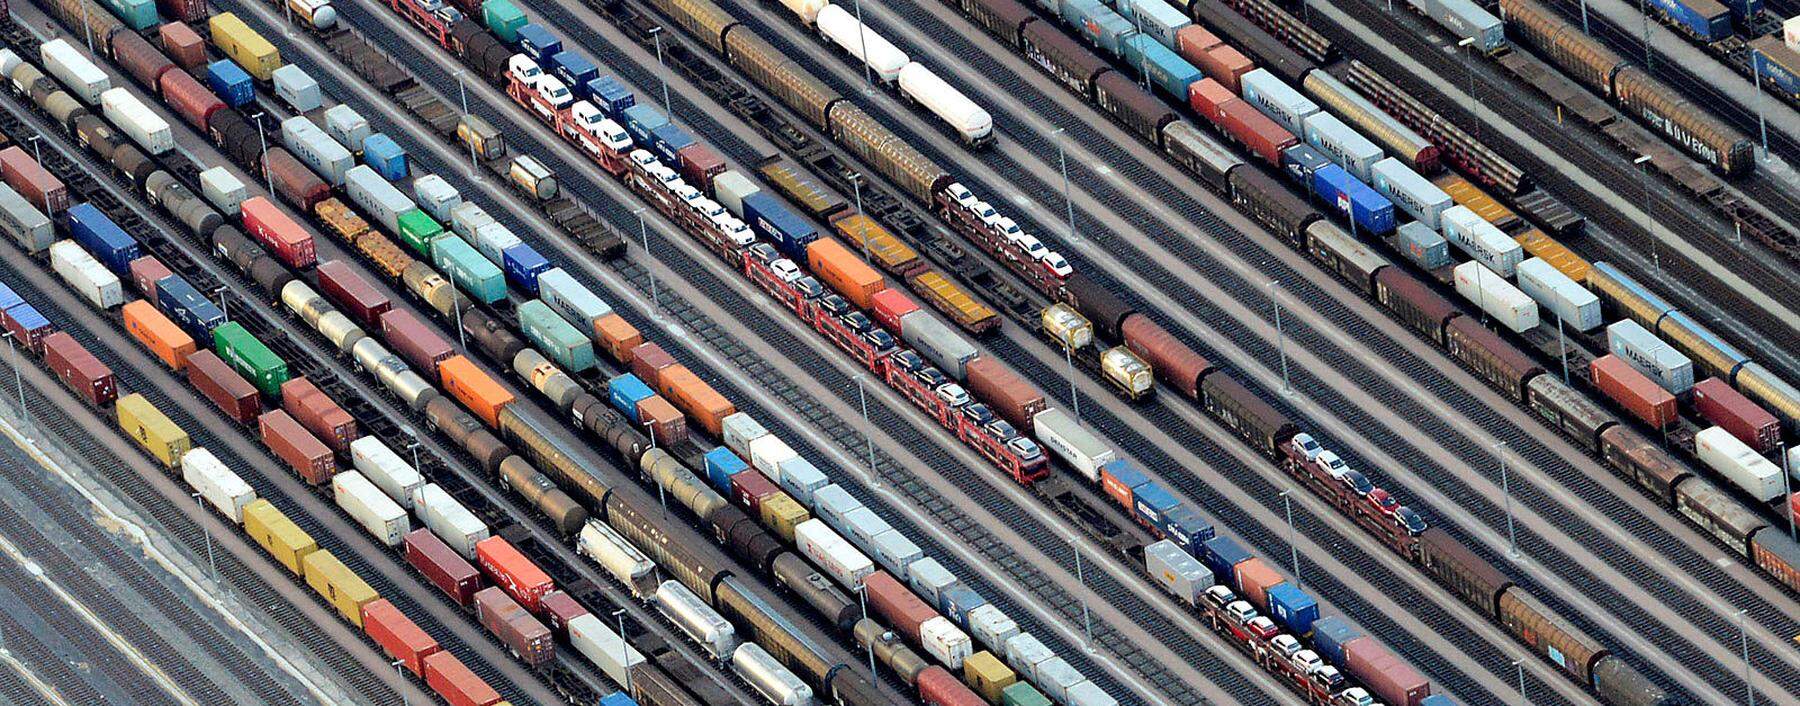 Containers and cars are loaded on freight trains at the railroad shunting yard in Maschen near Hamburg